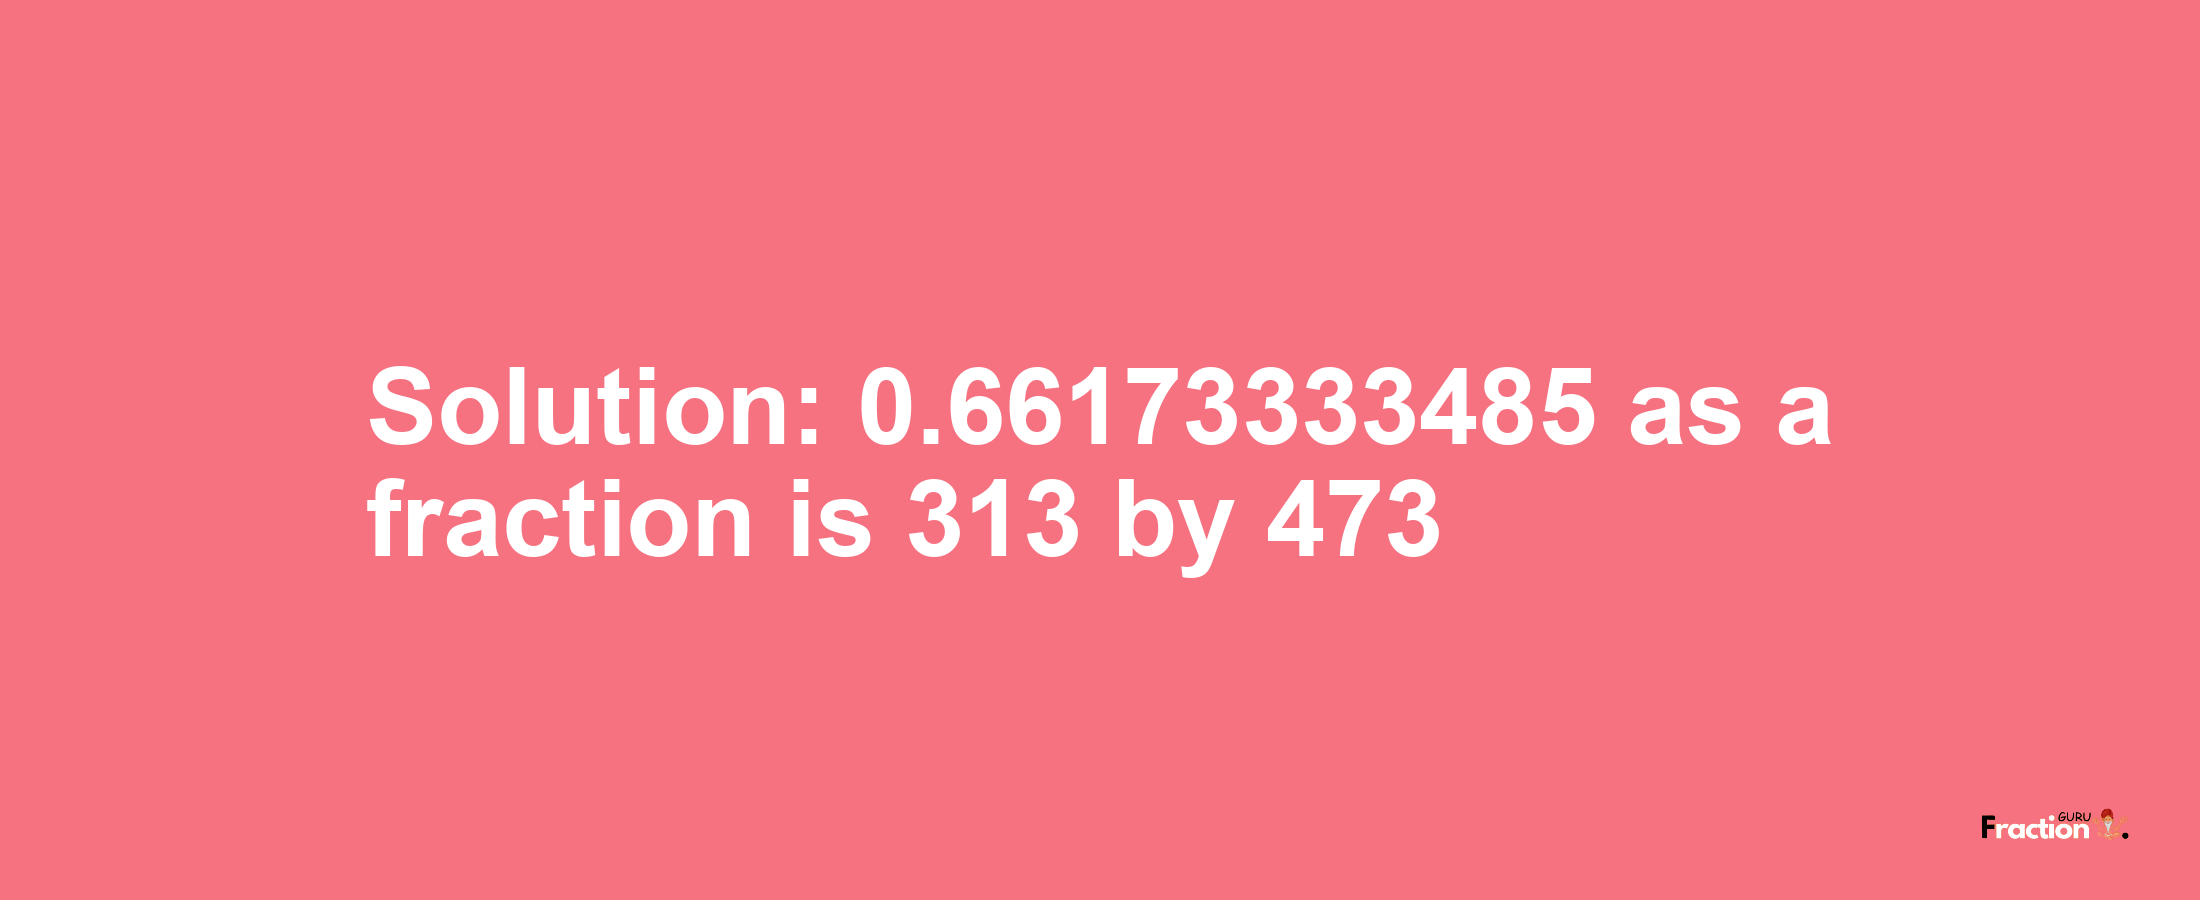 Solution:0.66173333485 as a fraction is 313/473